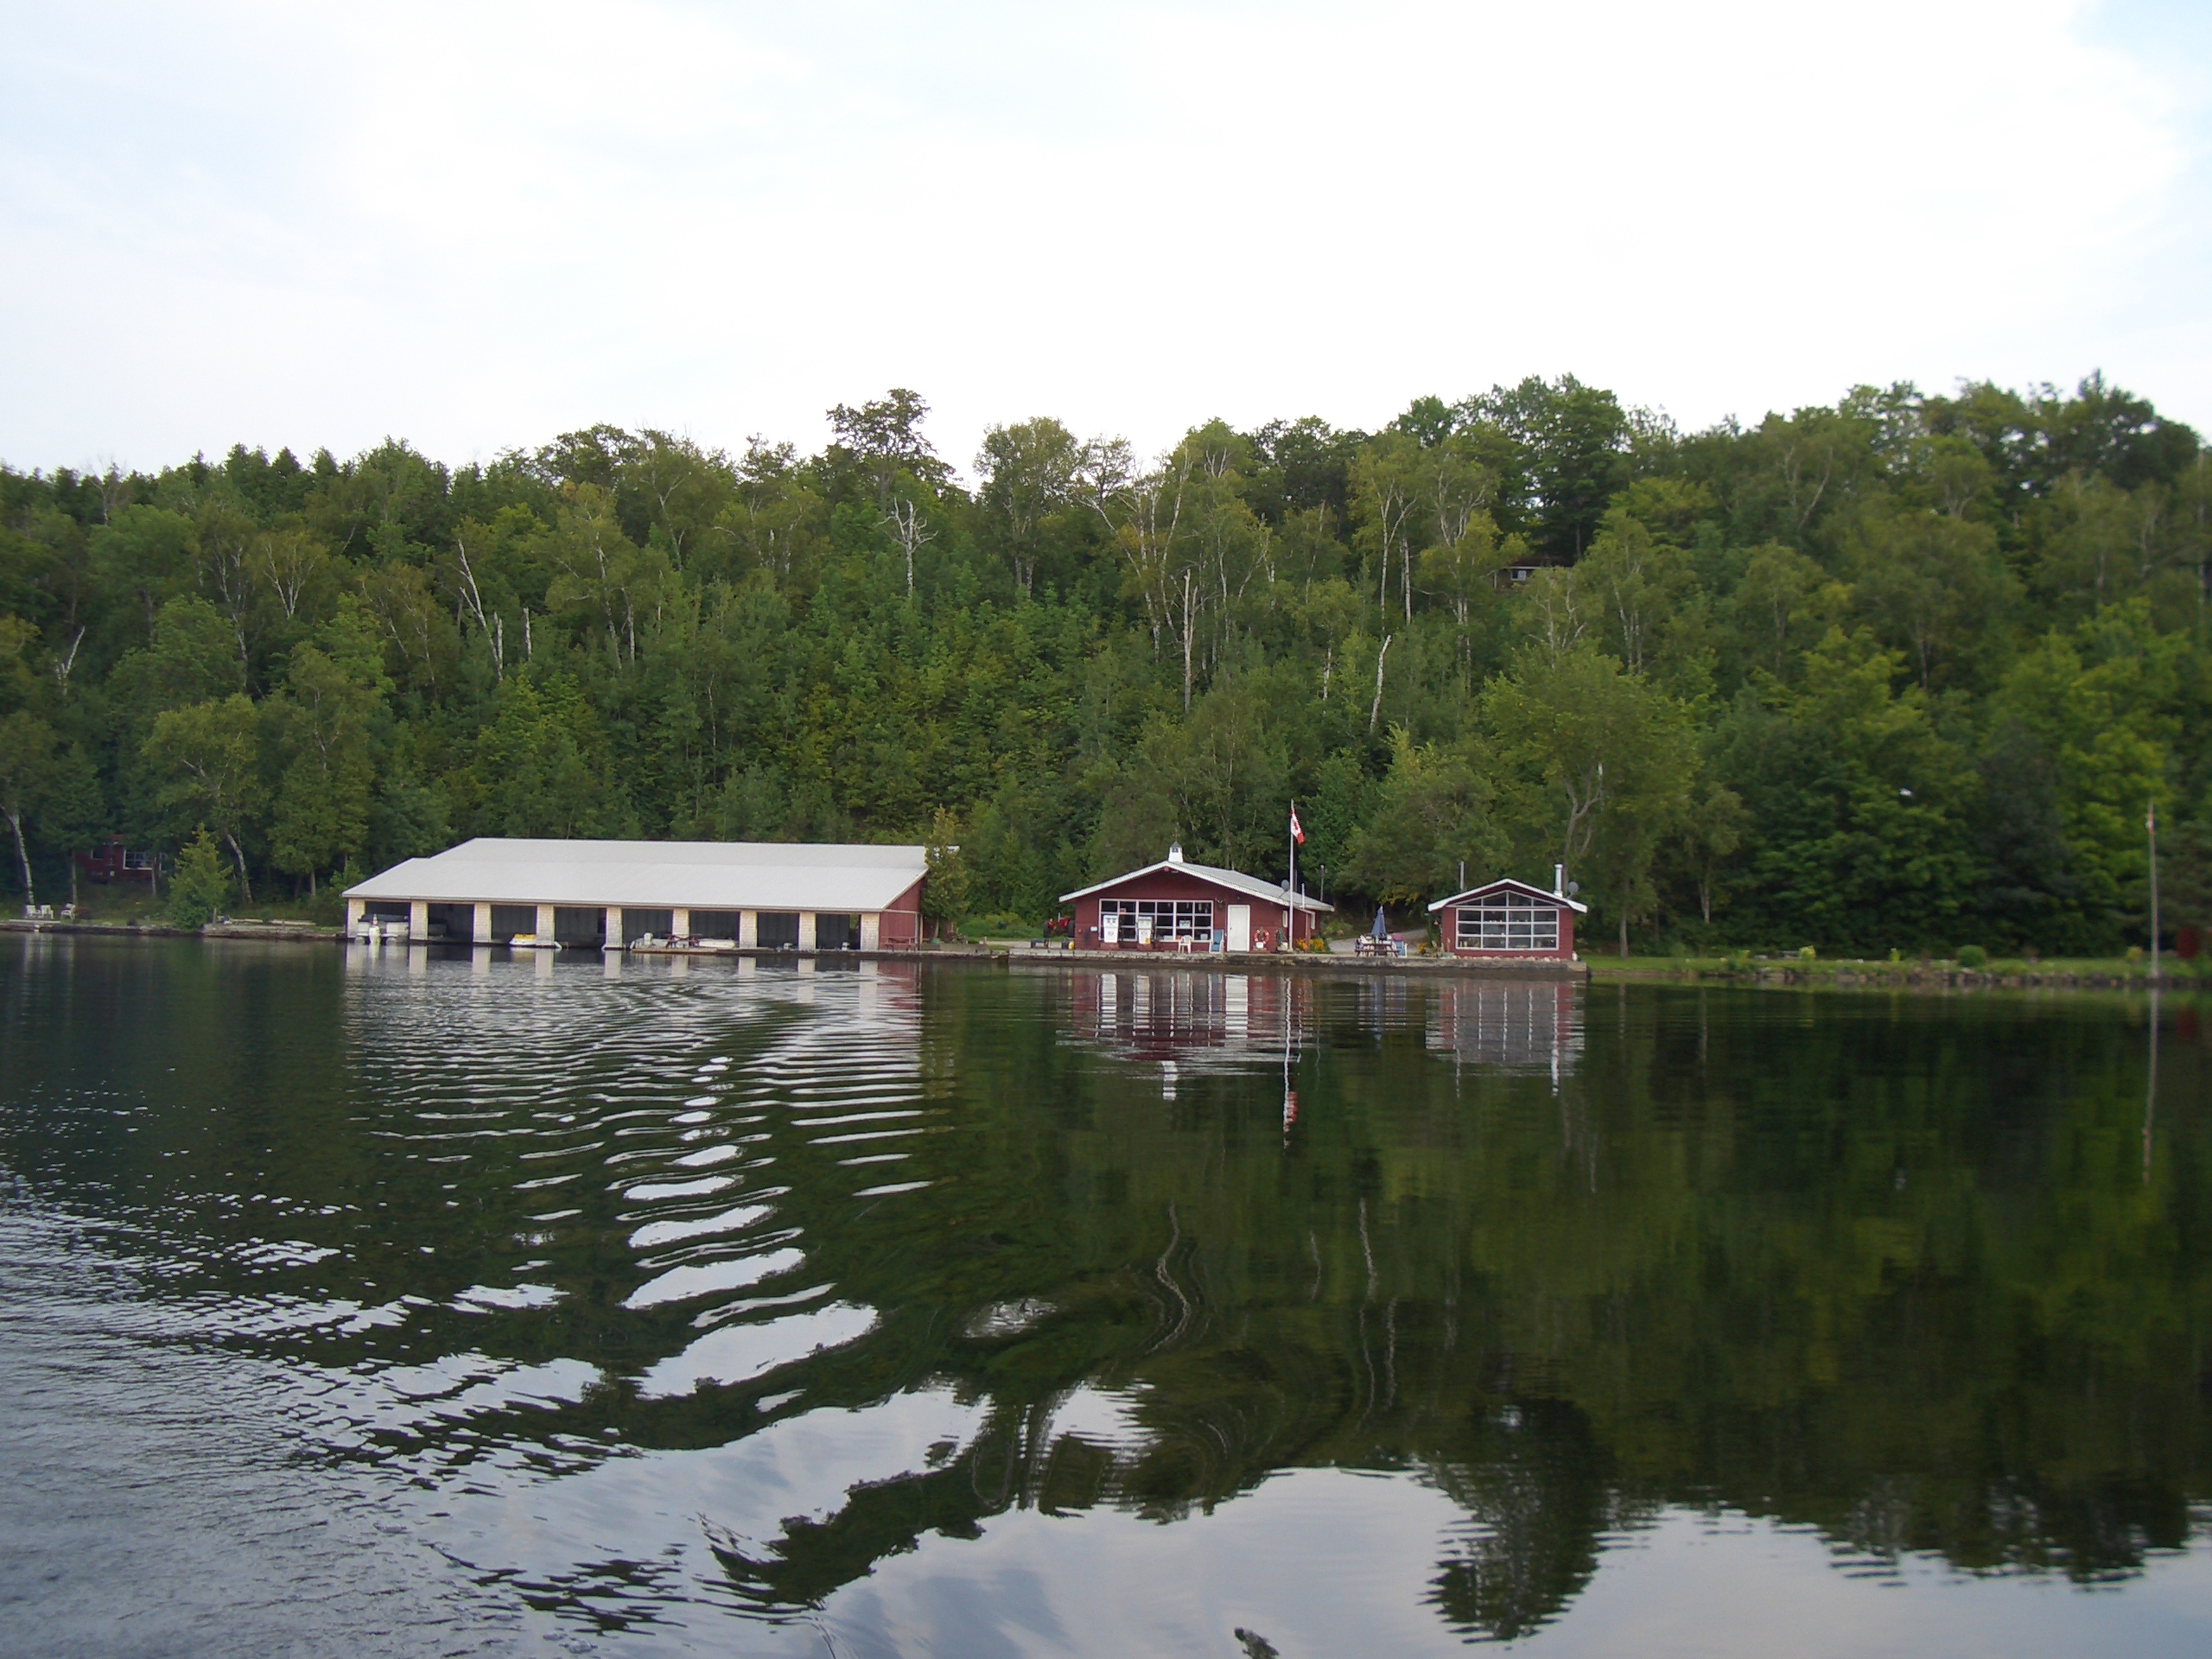 Directly on the Trent Severn waterway, the marina offers over 600 feet of deep dockage for customers